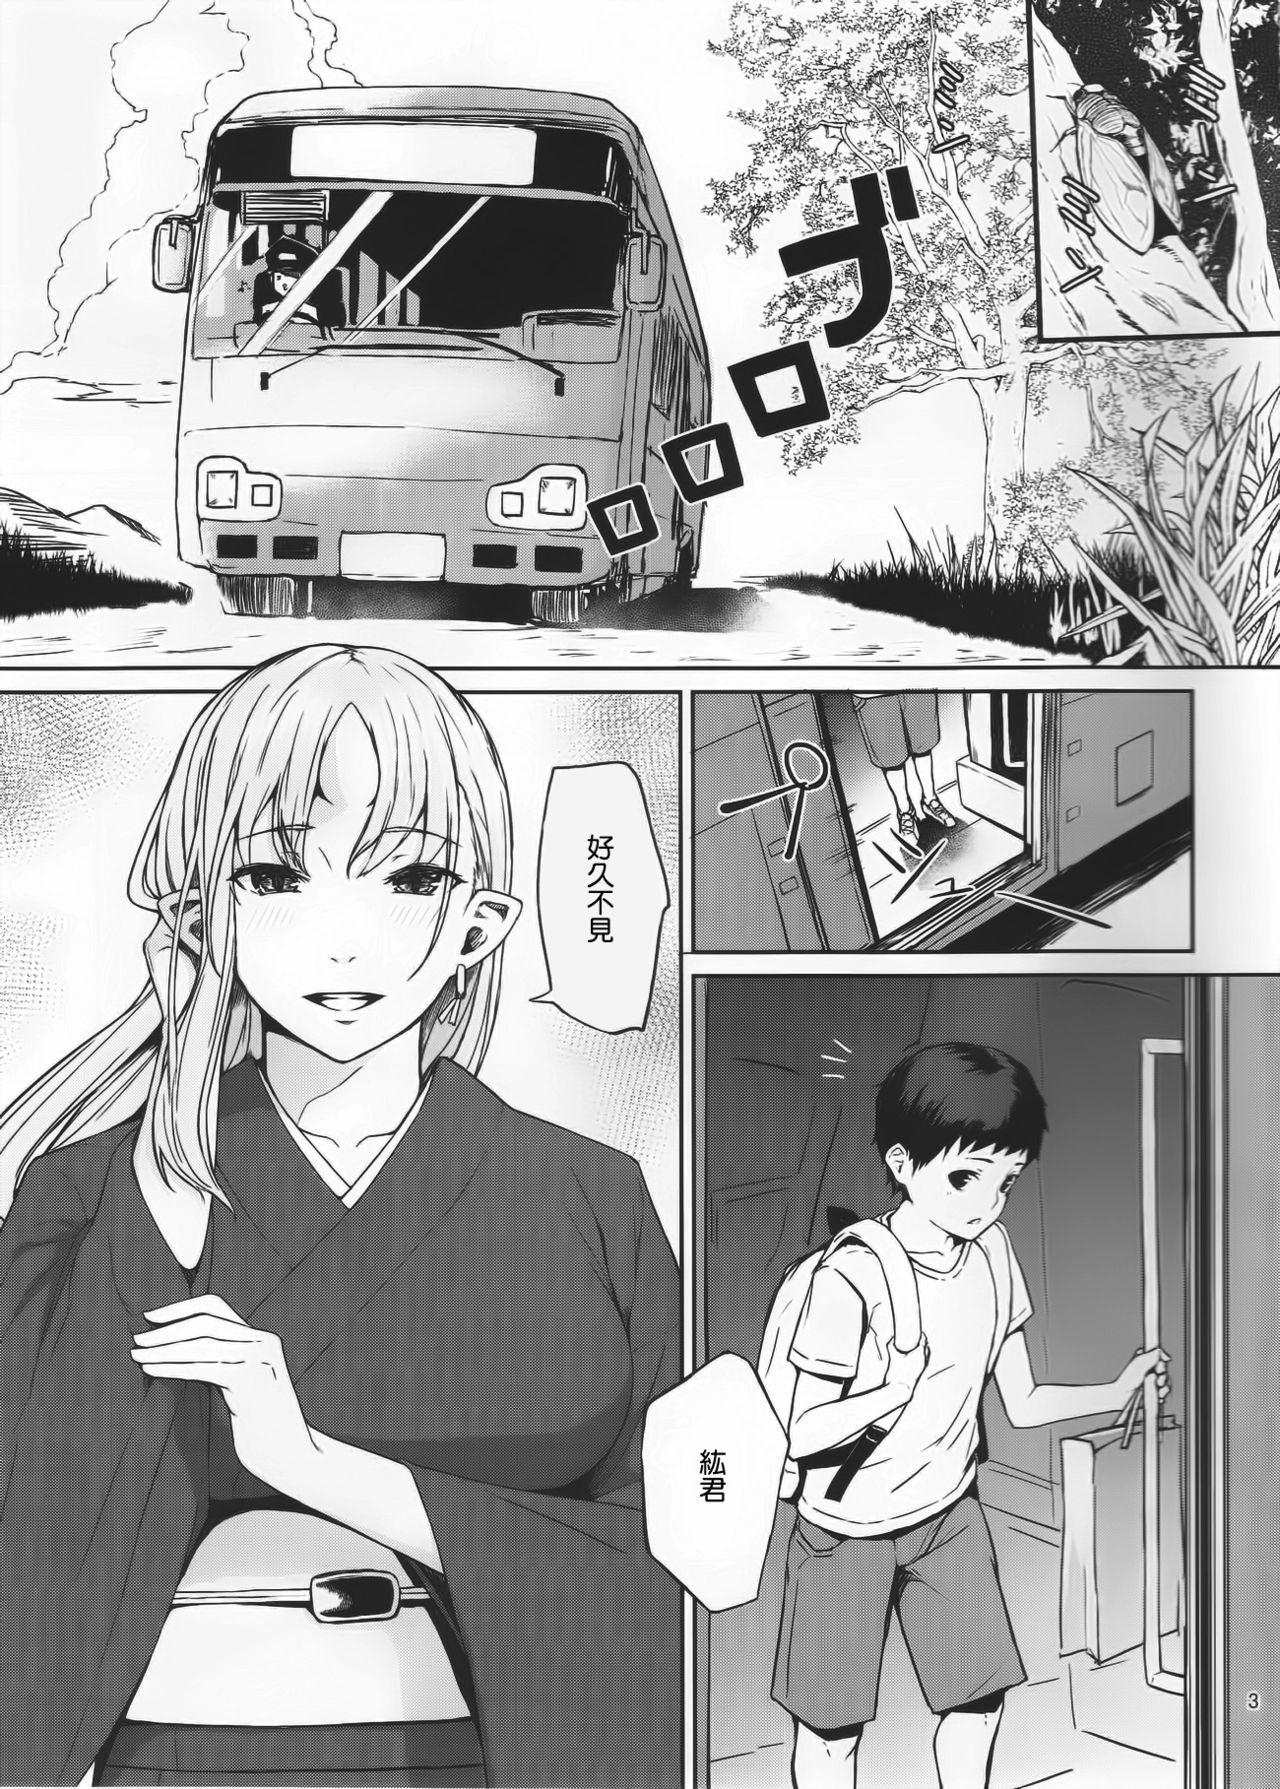 Married Oni no Sumu Ie Gaygroup - Page 3